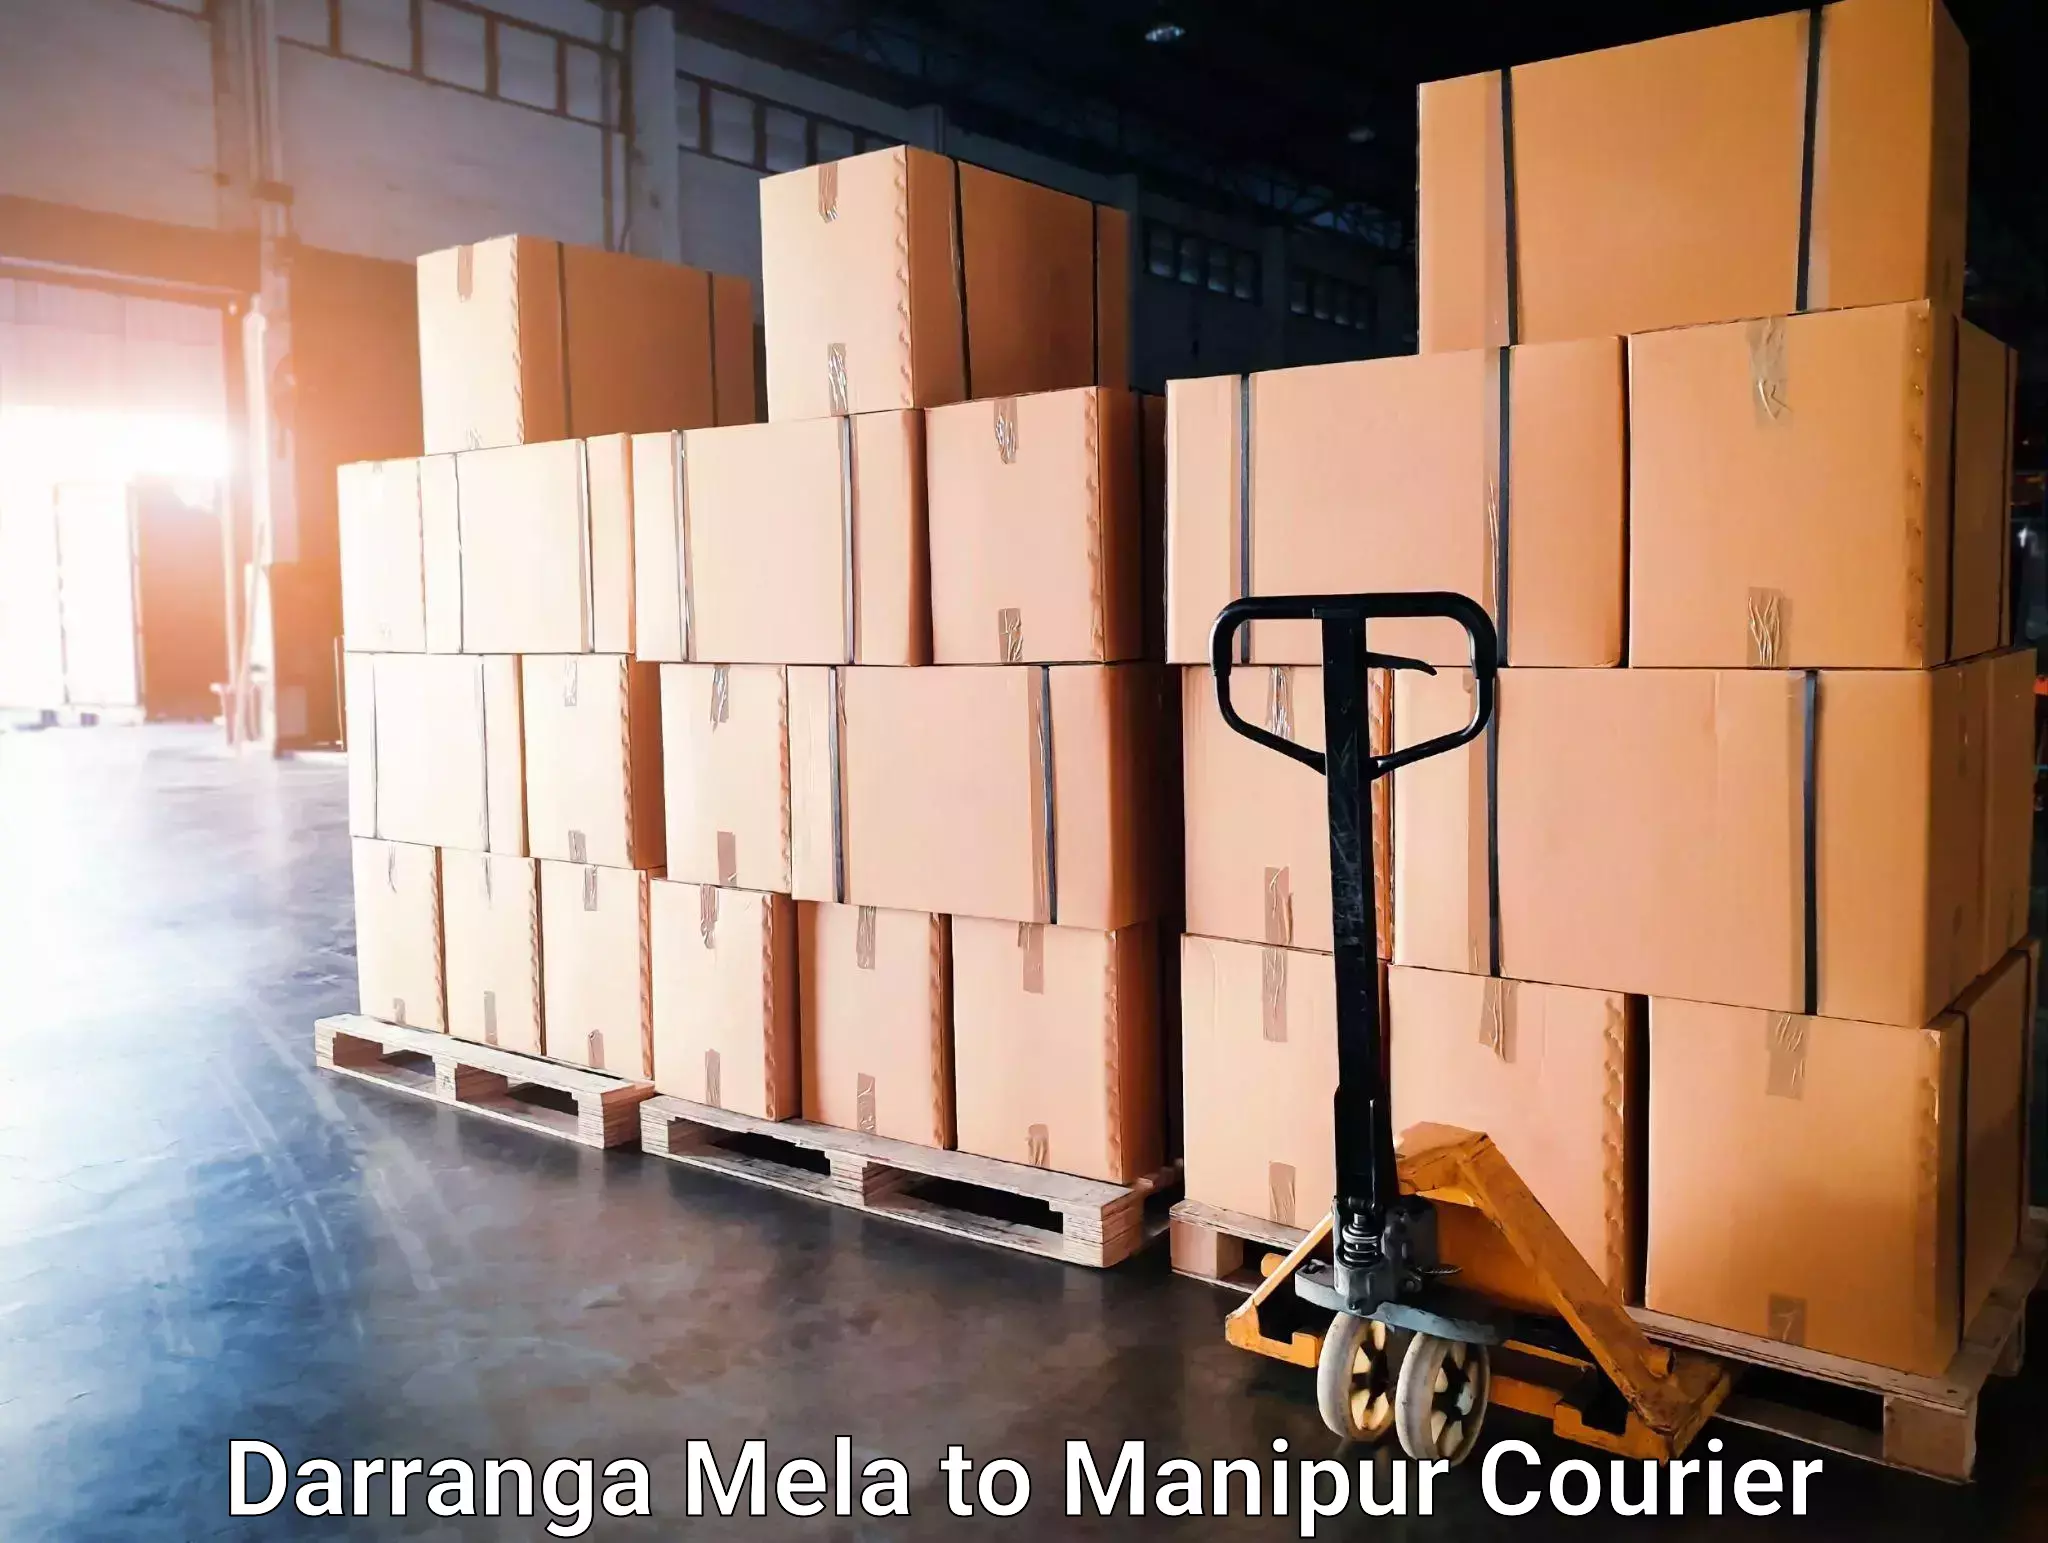 Local courier options in Darranga Mela to Imphal